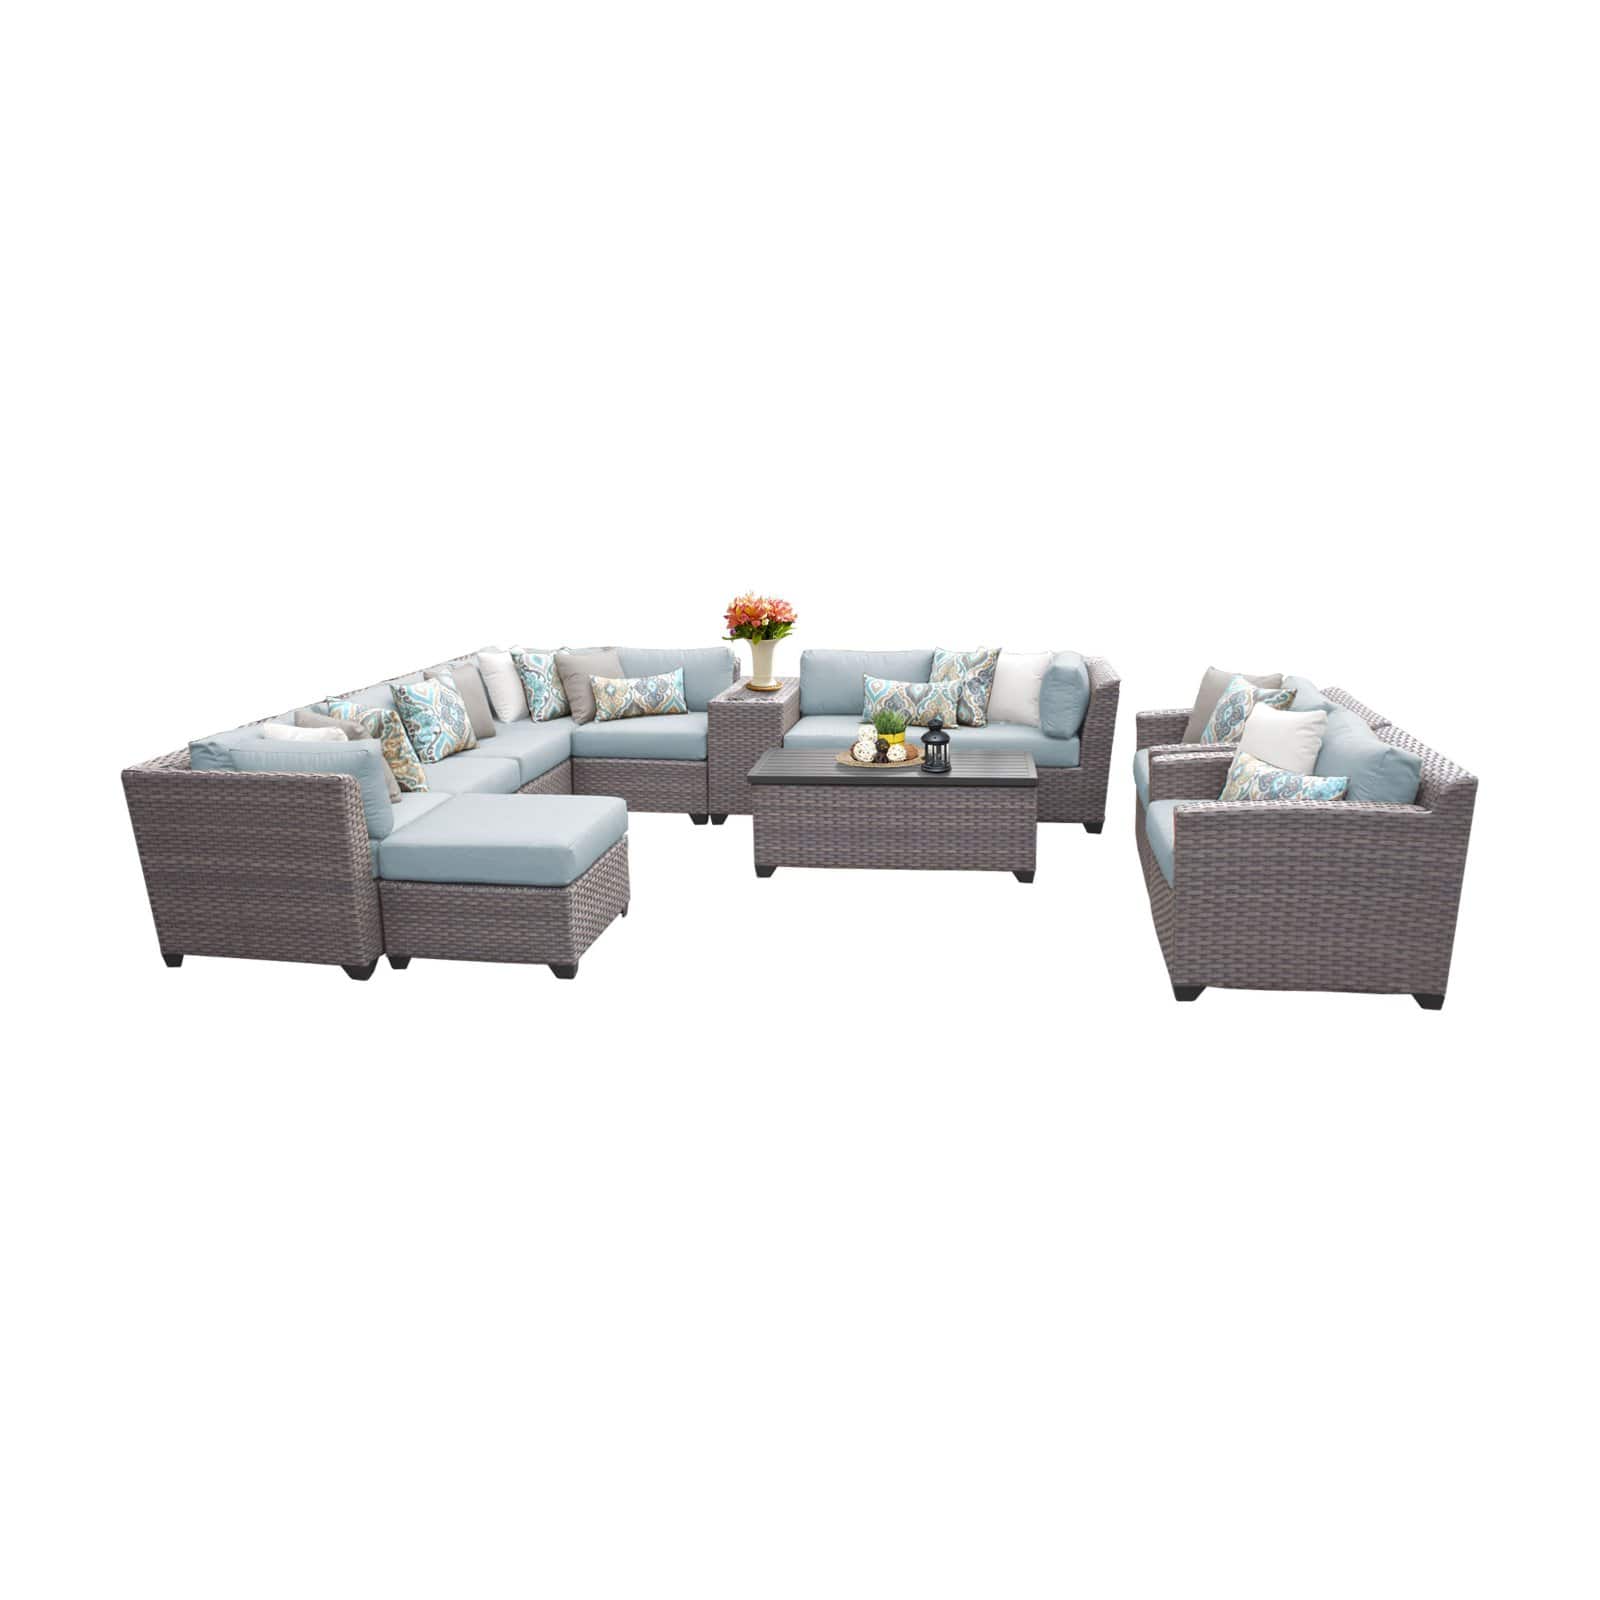 TK Classics Florence Wicker 12 Piece Patio Conversation Set with Coffee Table and 2 Sets of Cushion Covers - image 2 of 2